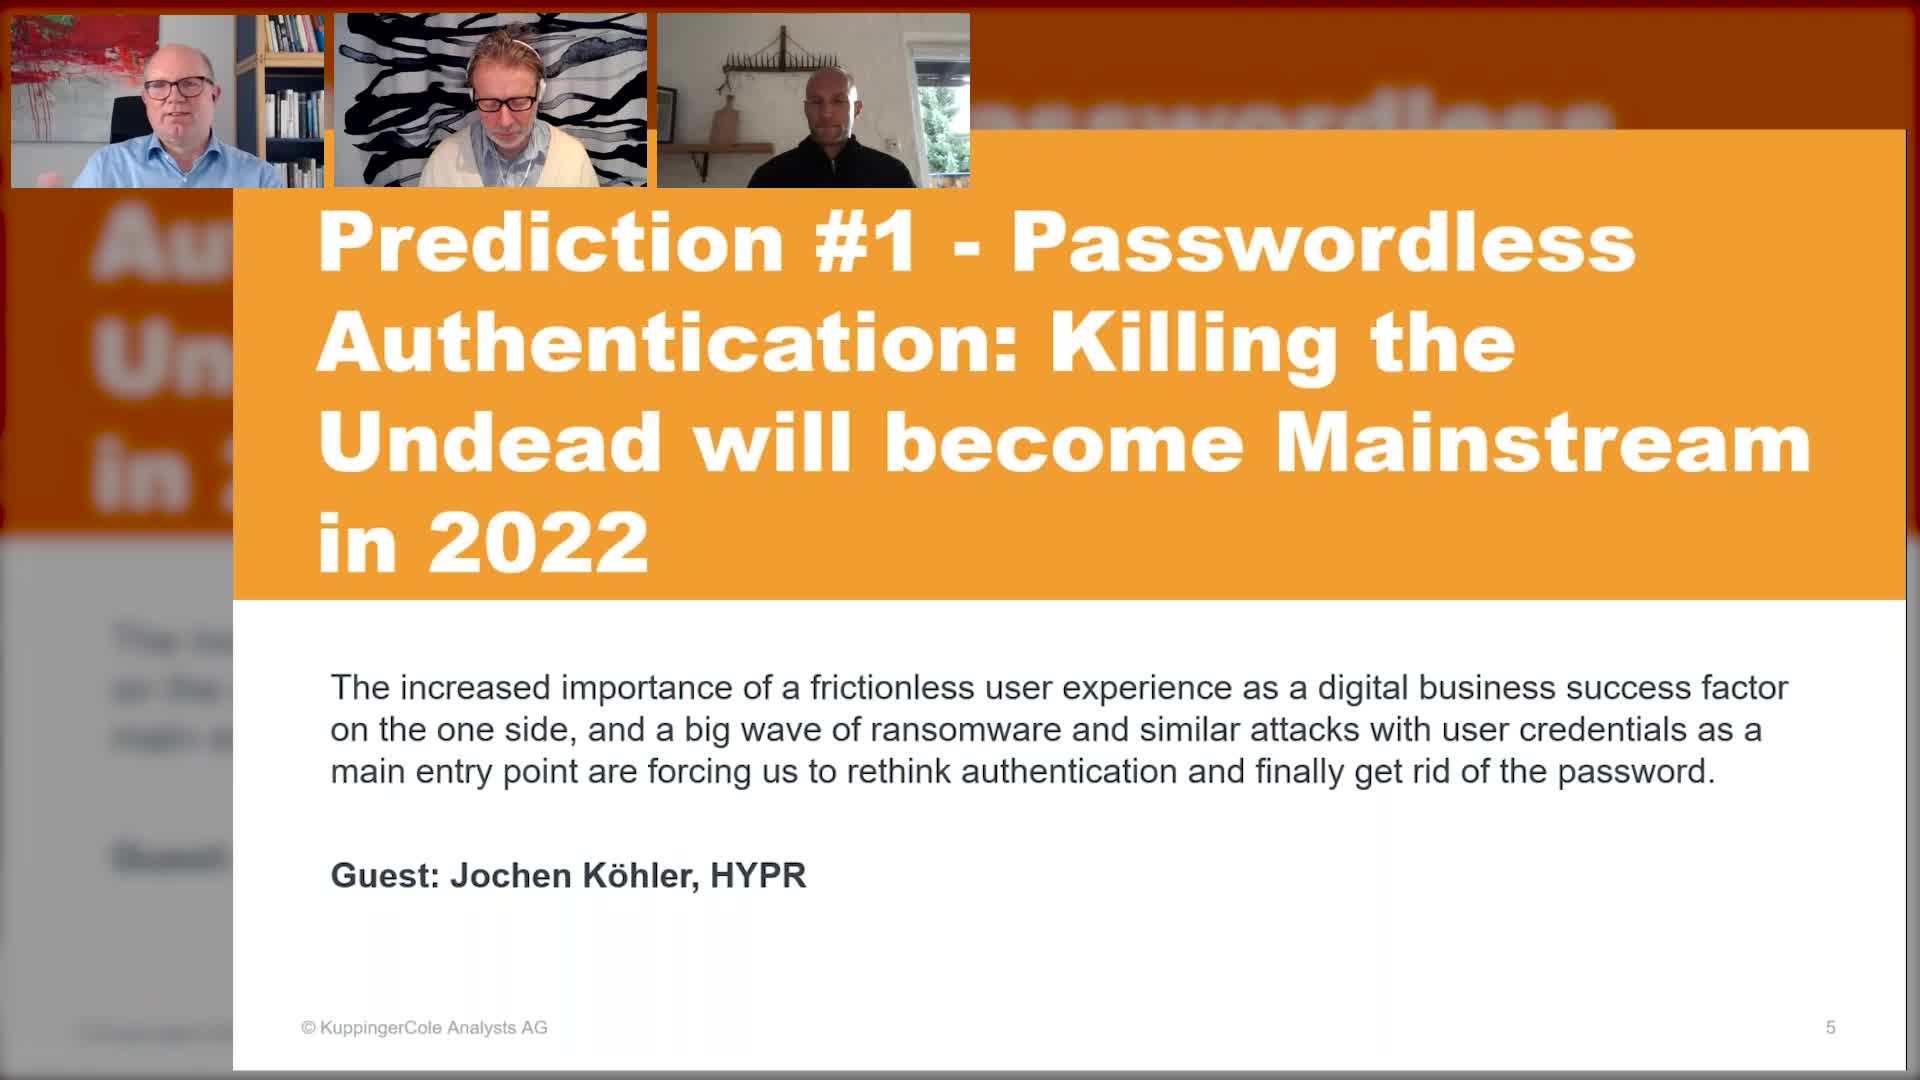 Prediction #1 - Passwordless Authentication: Killing the Undead will become Mainstream in 2022